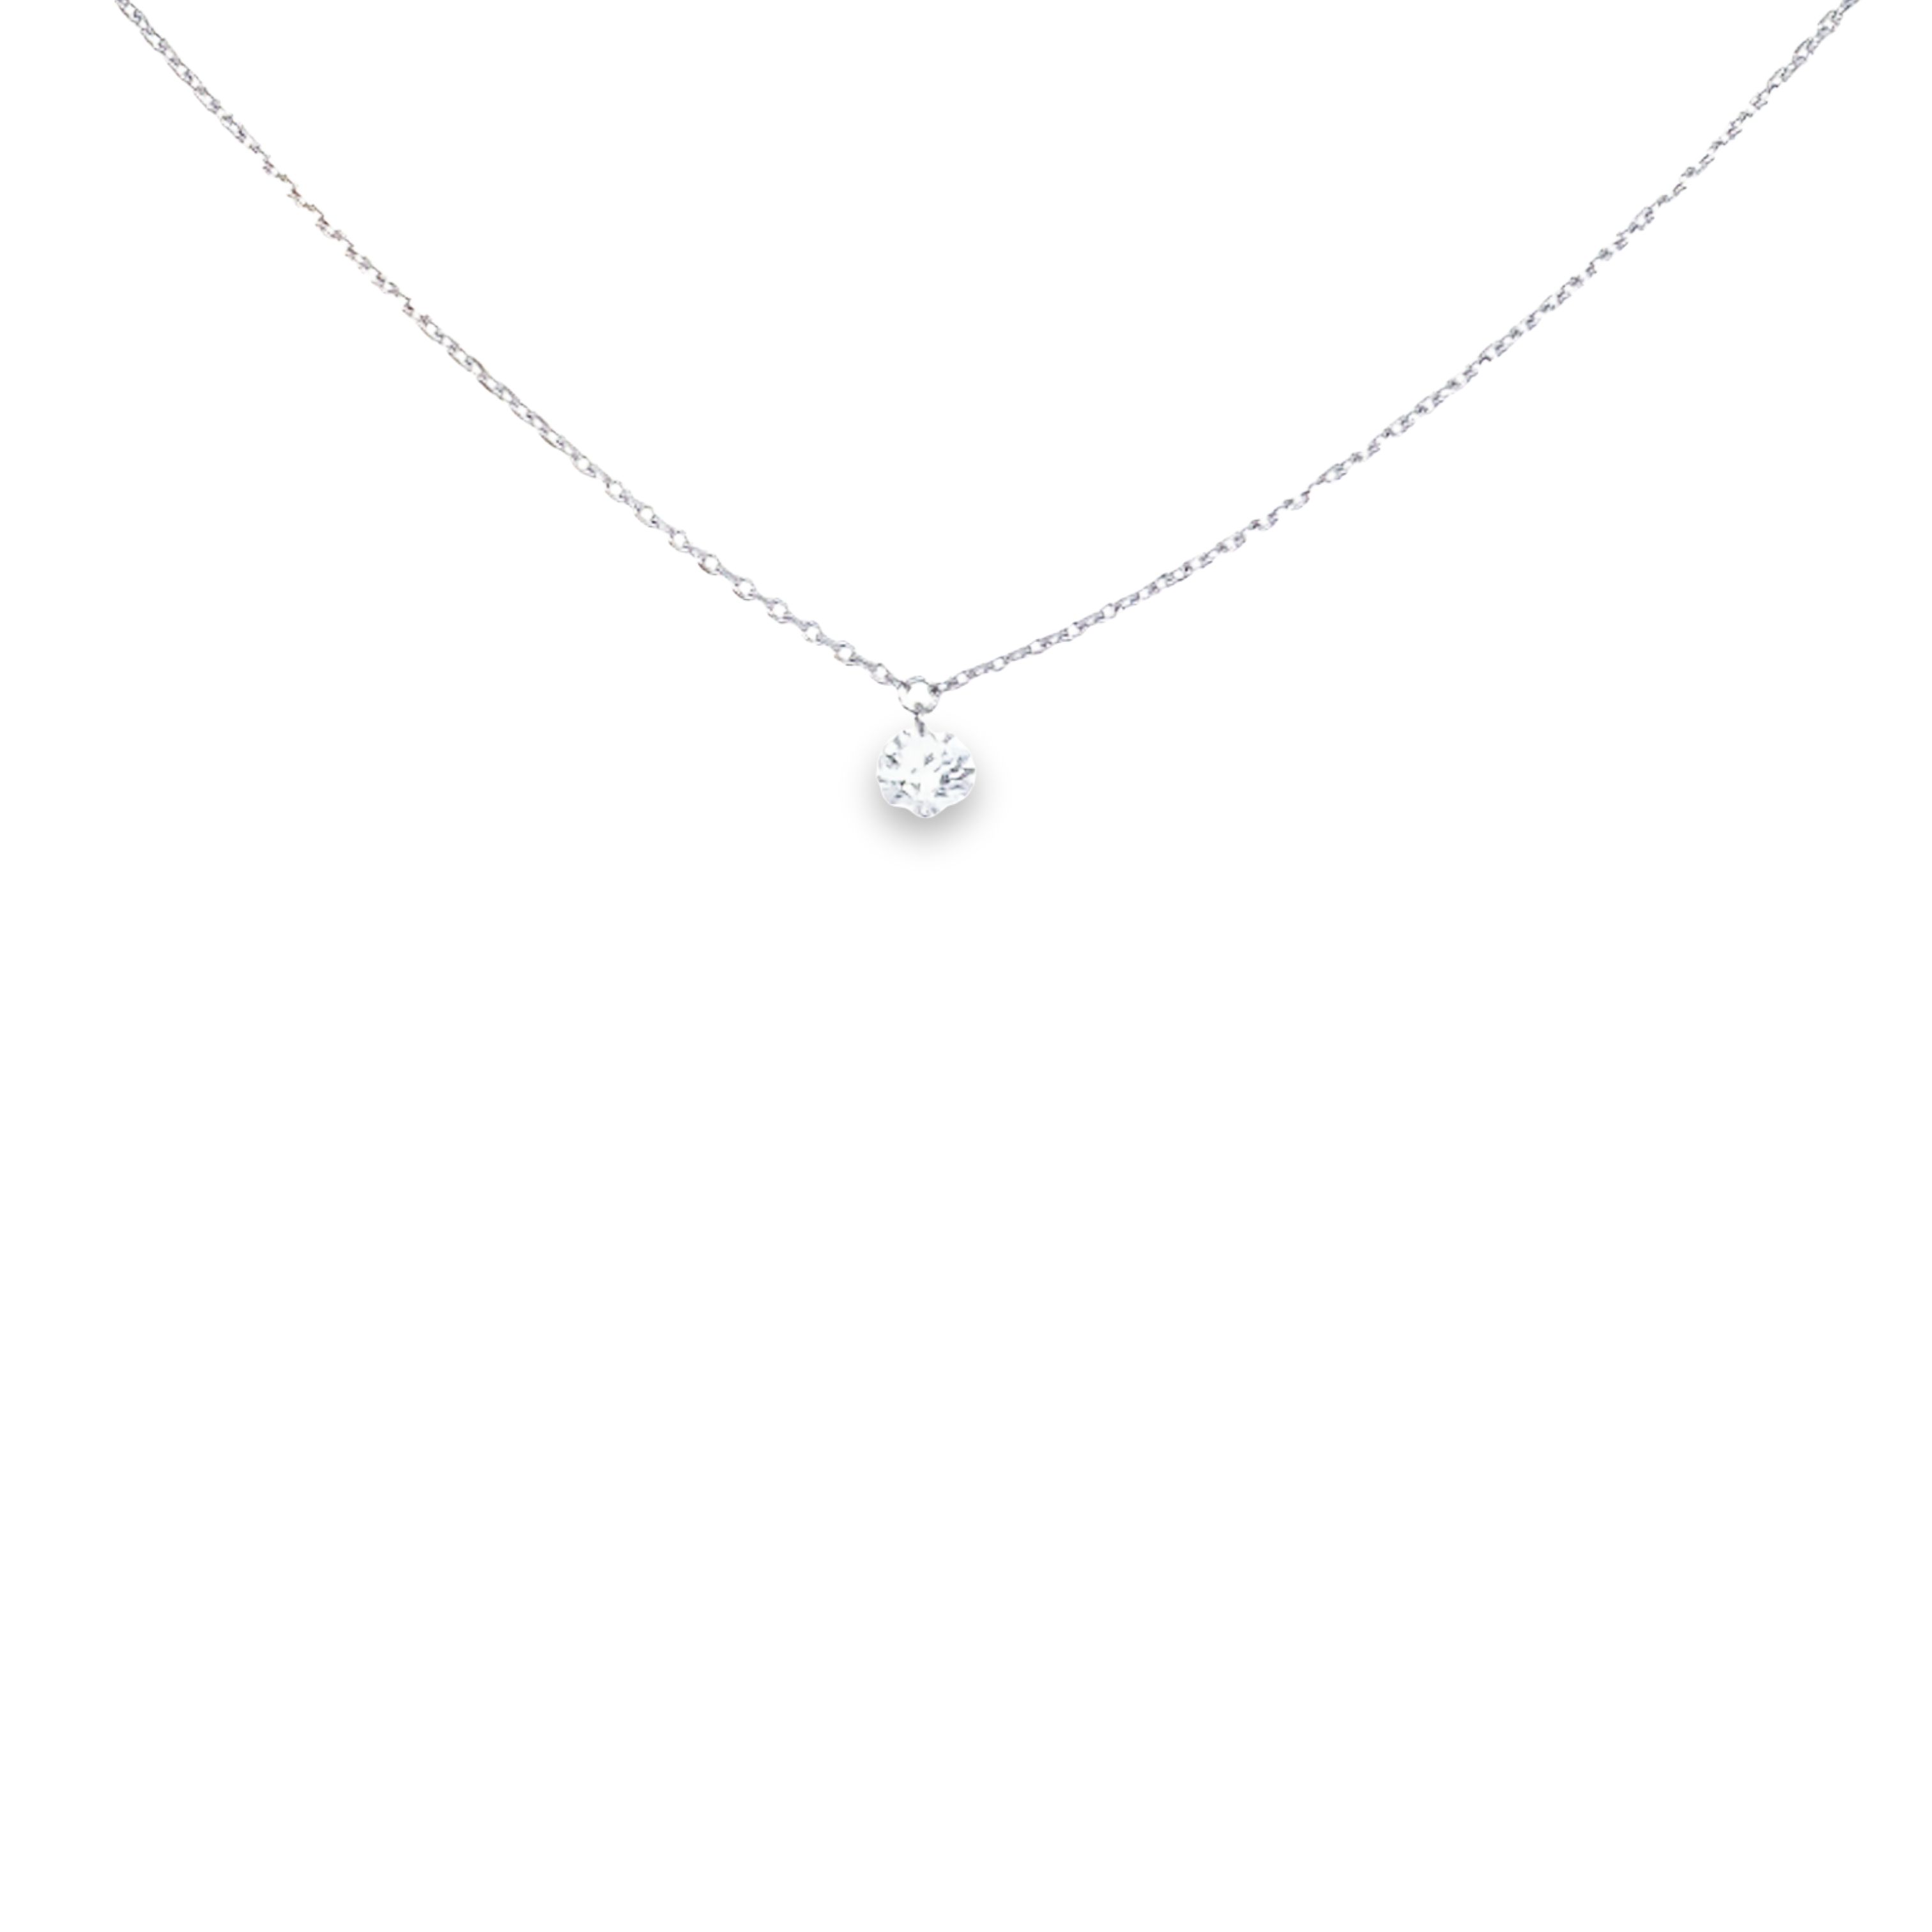 14 Karat white gold solitaire necklace with One 0.15Ct Round Brilliant G I Diamond